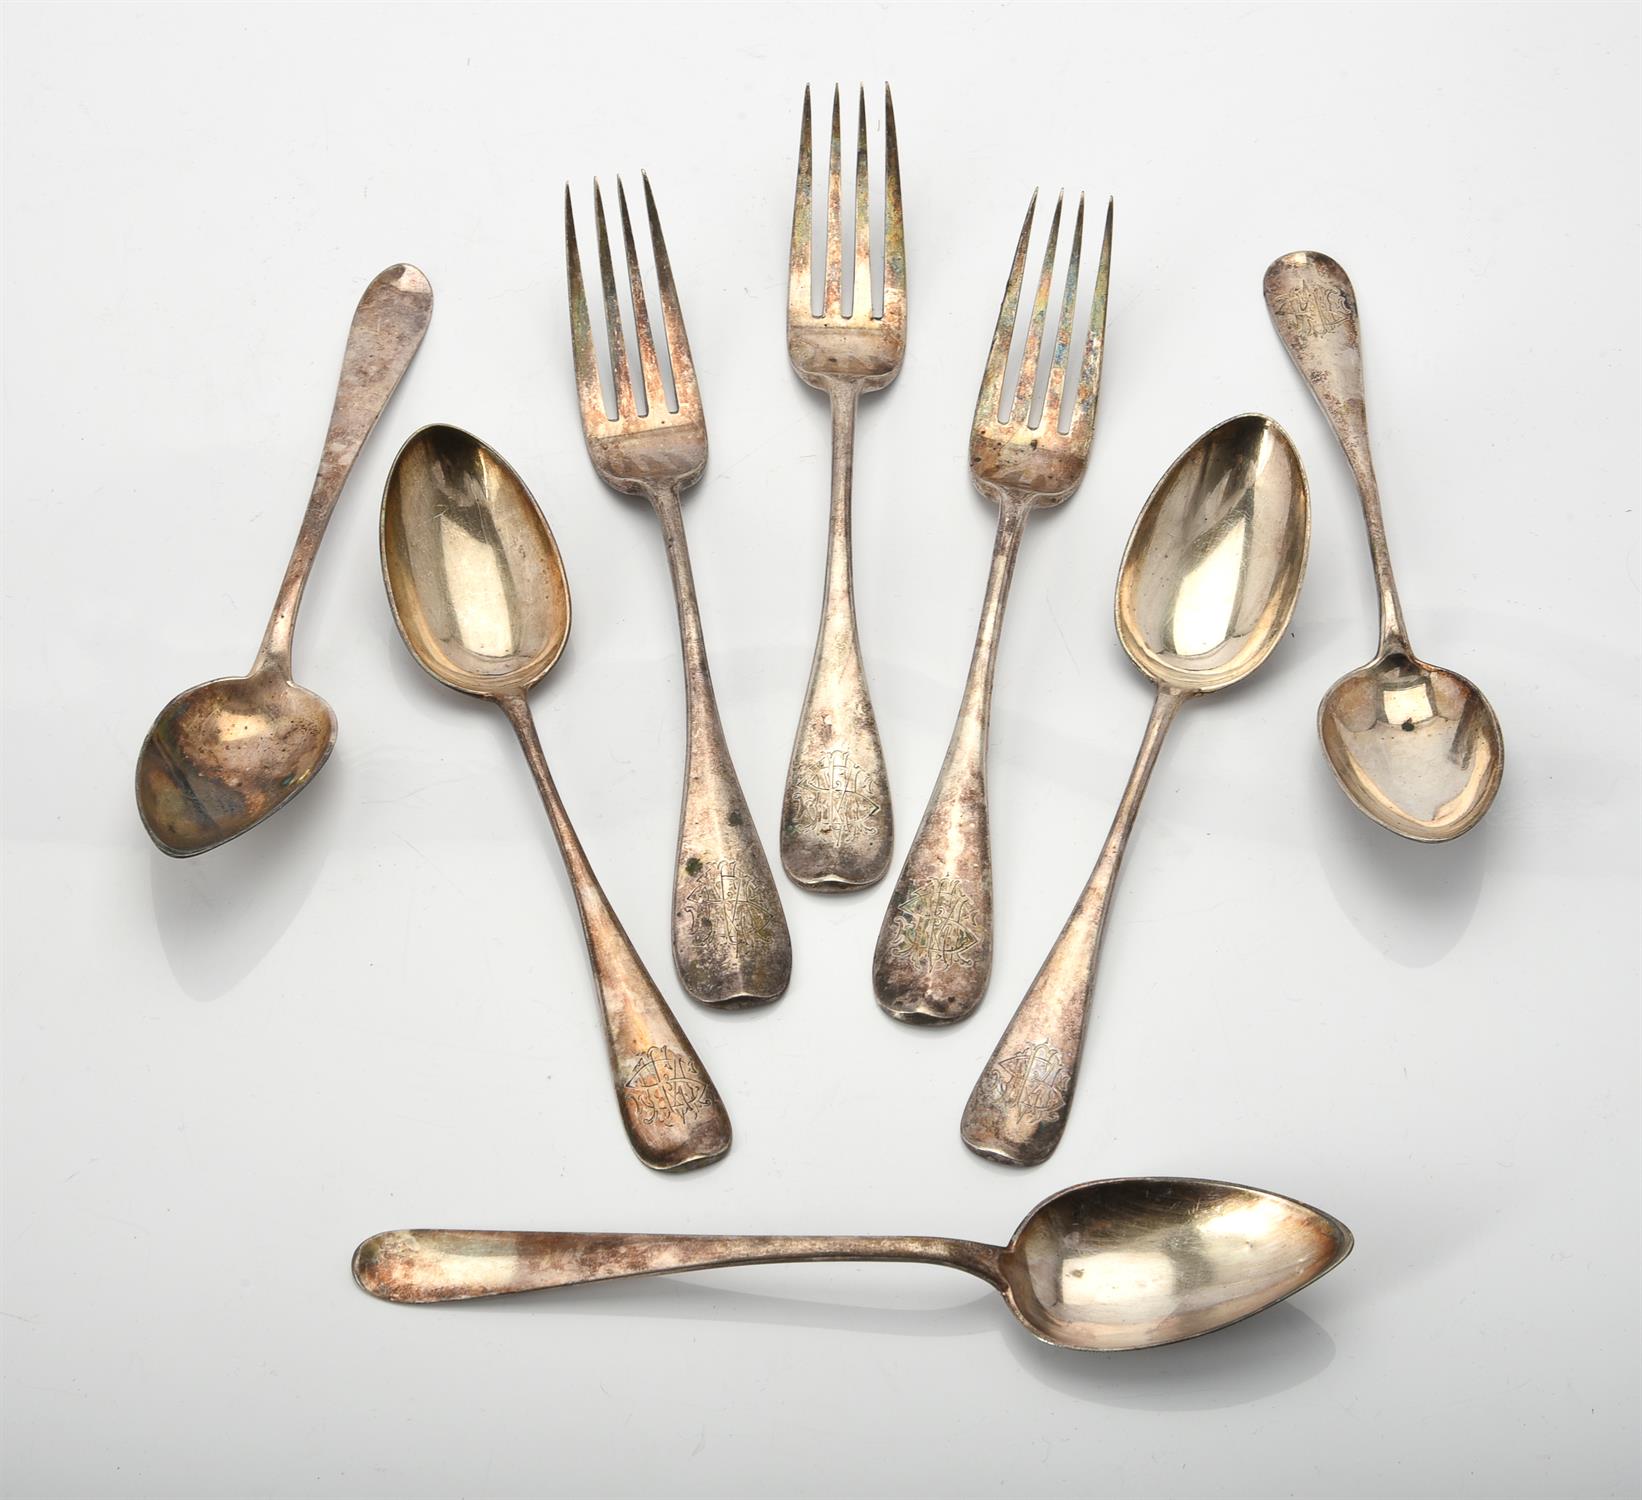 Three Russian silver table forks and three dessert spoons by Khlebnikov